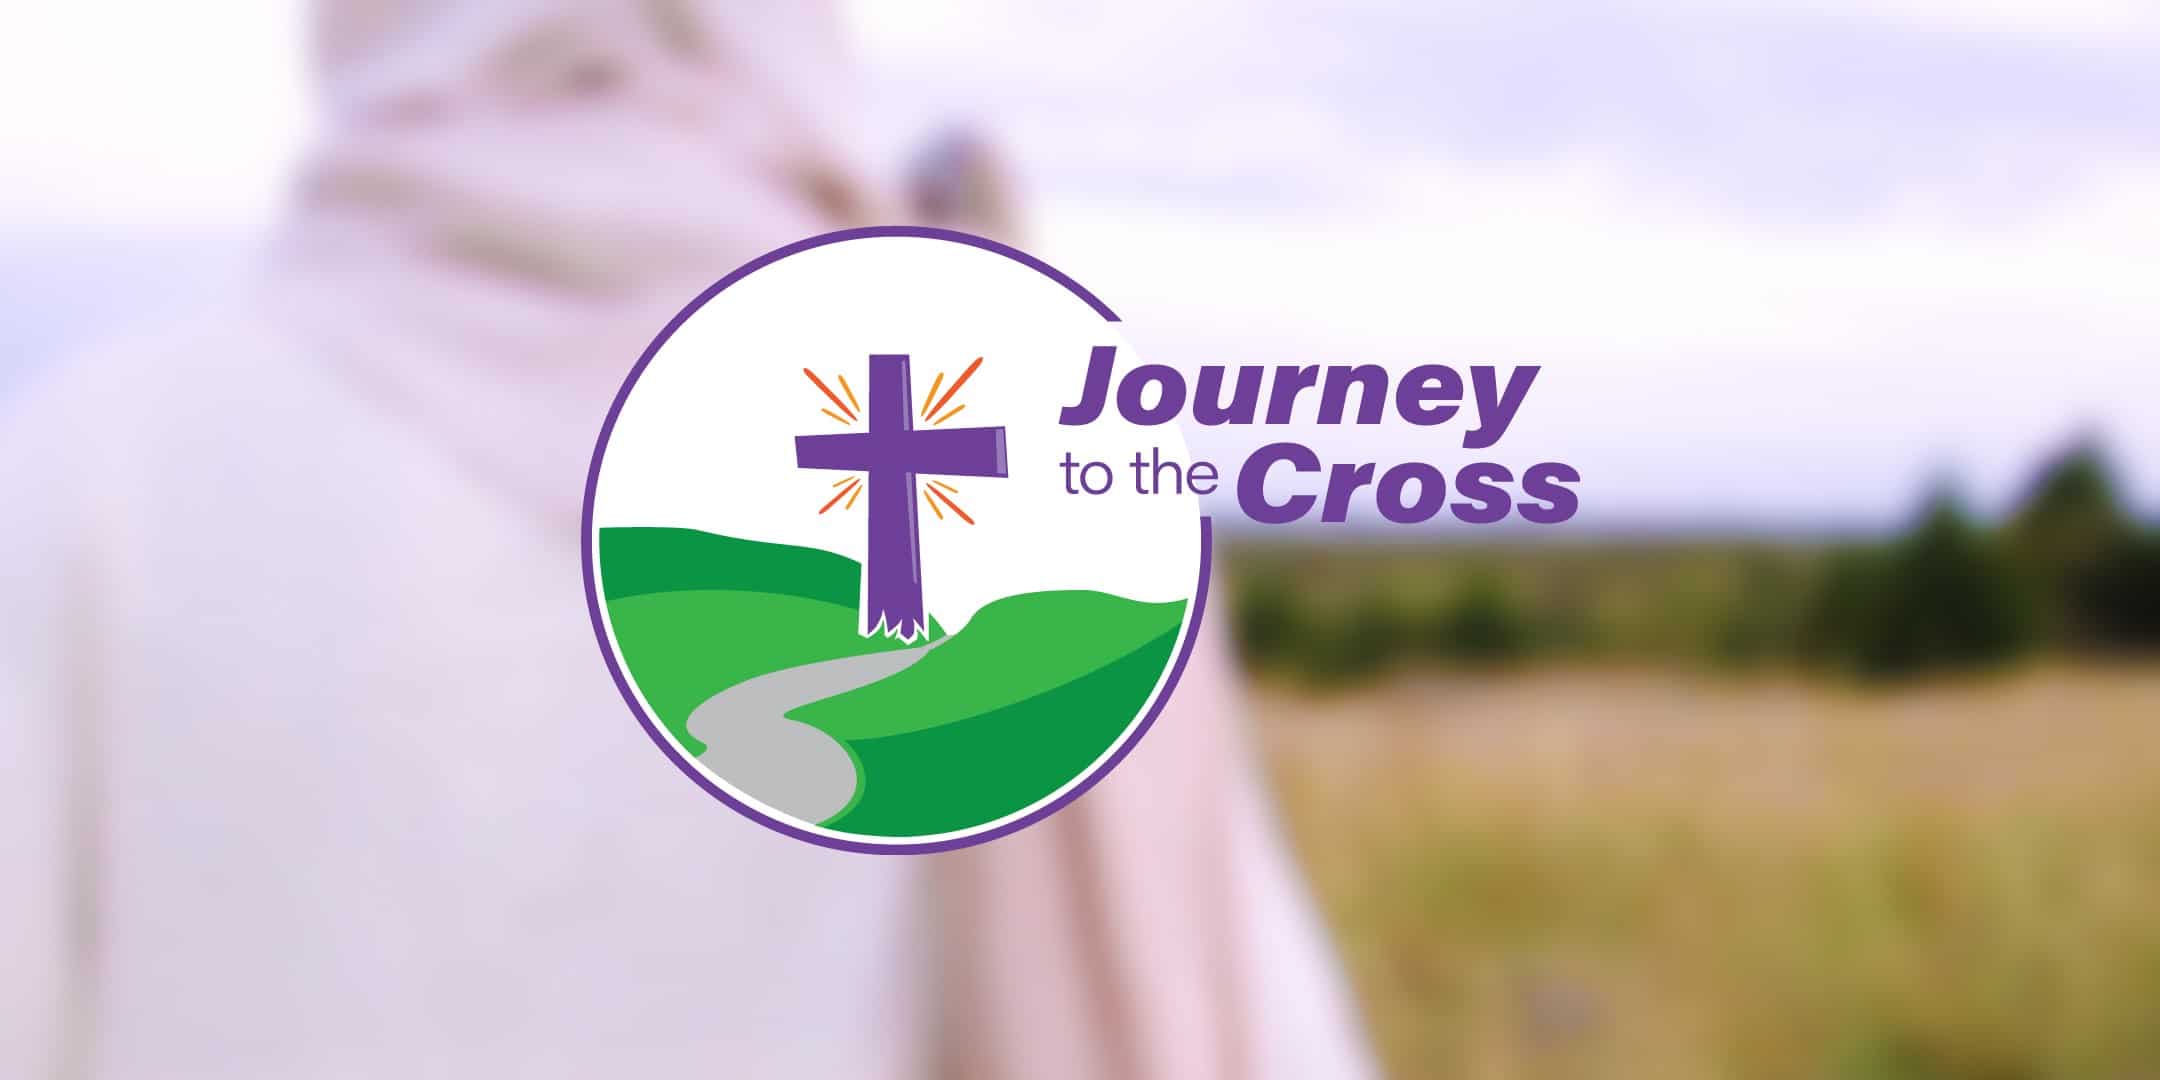 A graphic for Journey to the Cross.